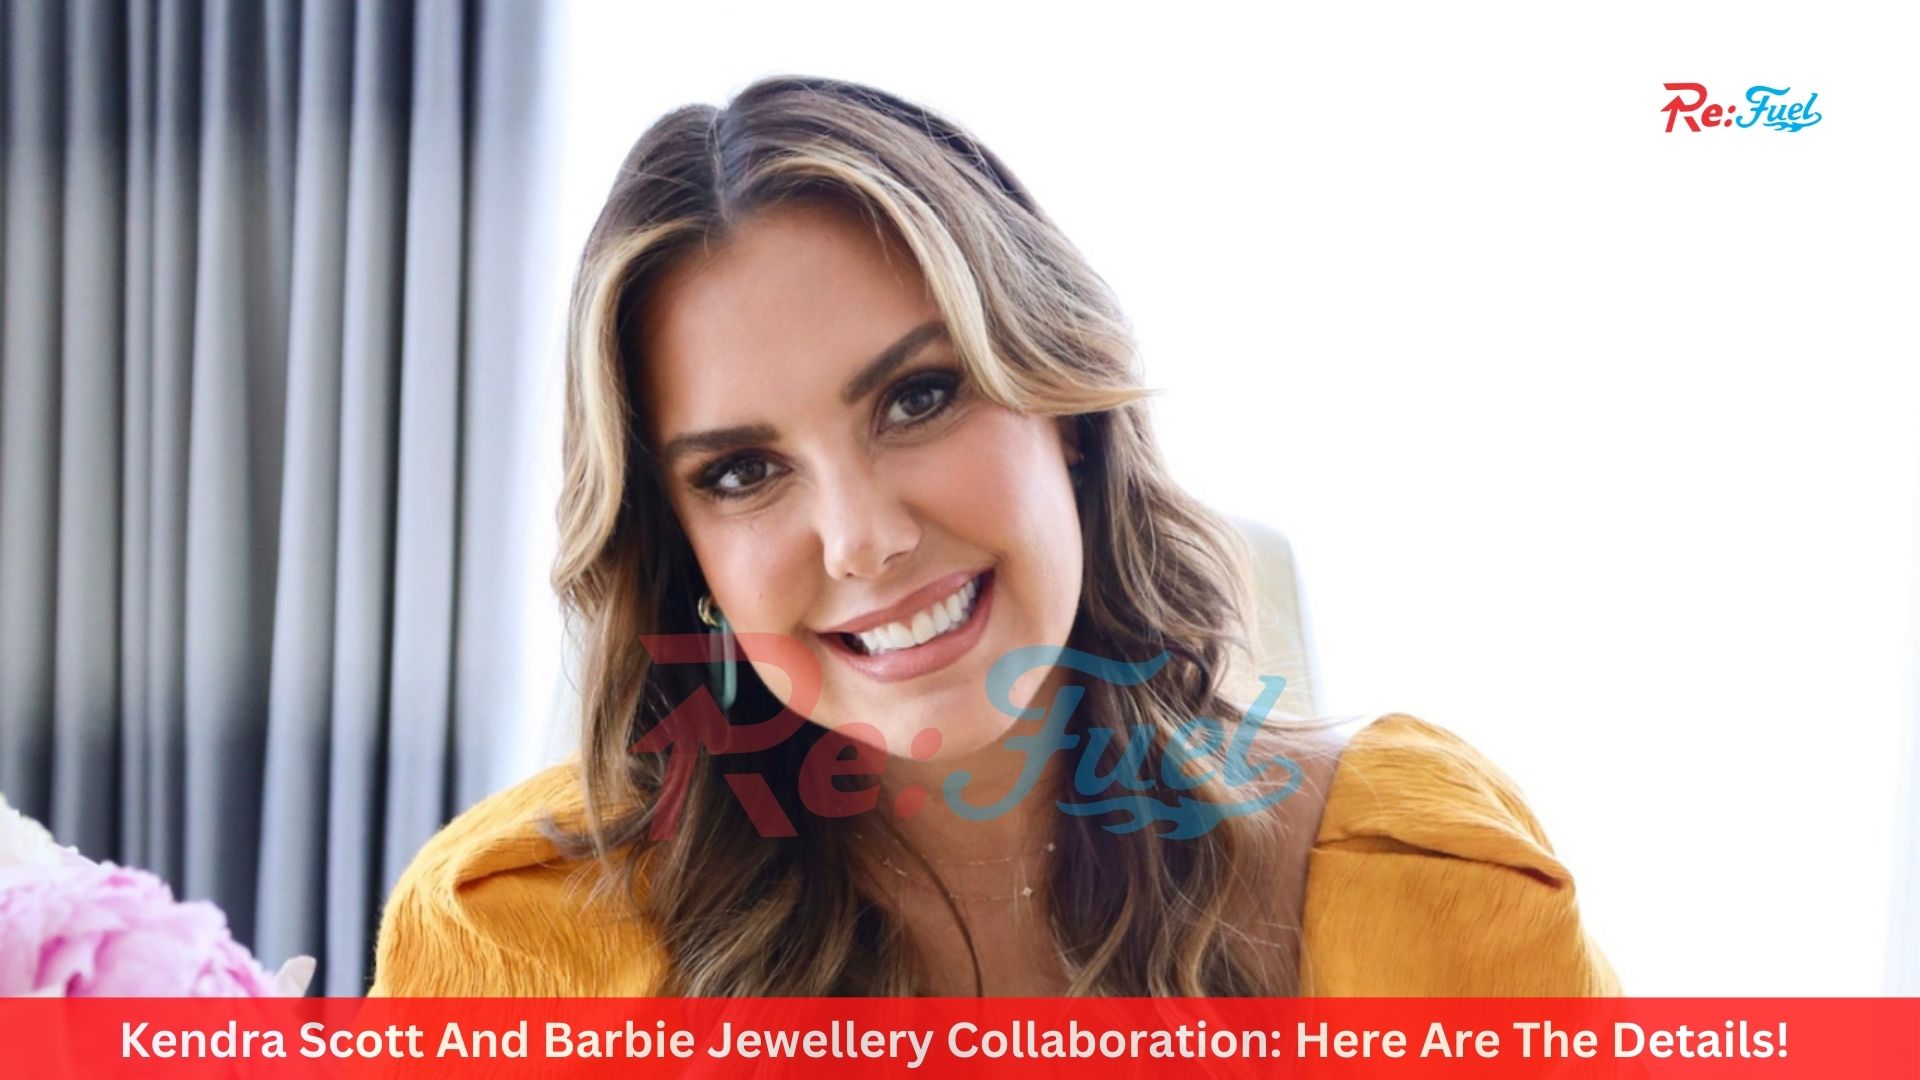 Kendra Scott And Barbie Jewellery Collaboration: Here Are The Details!